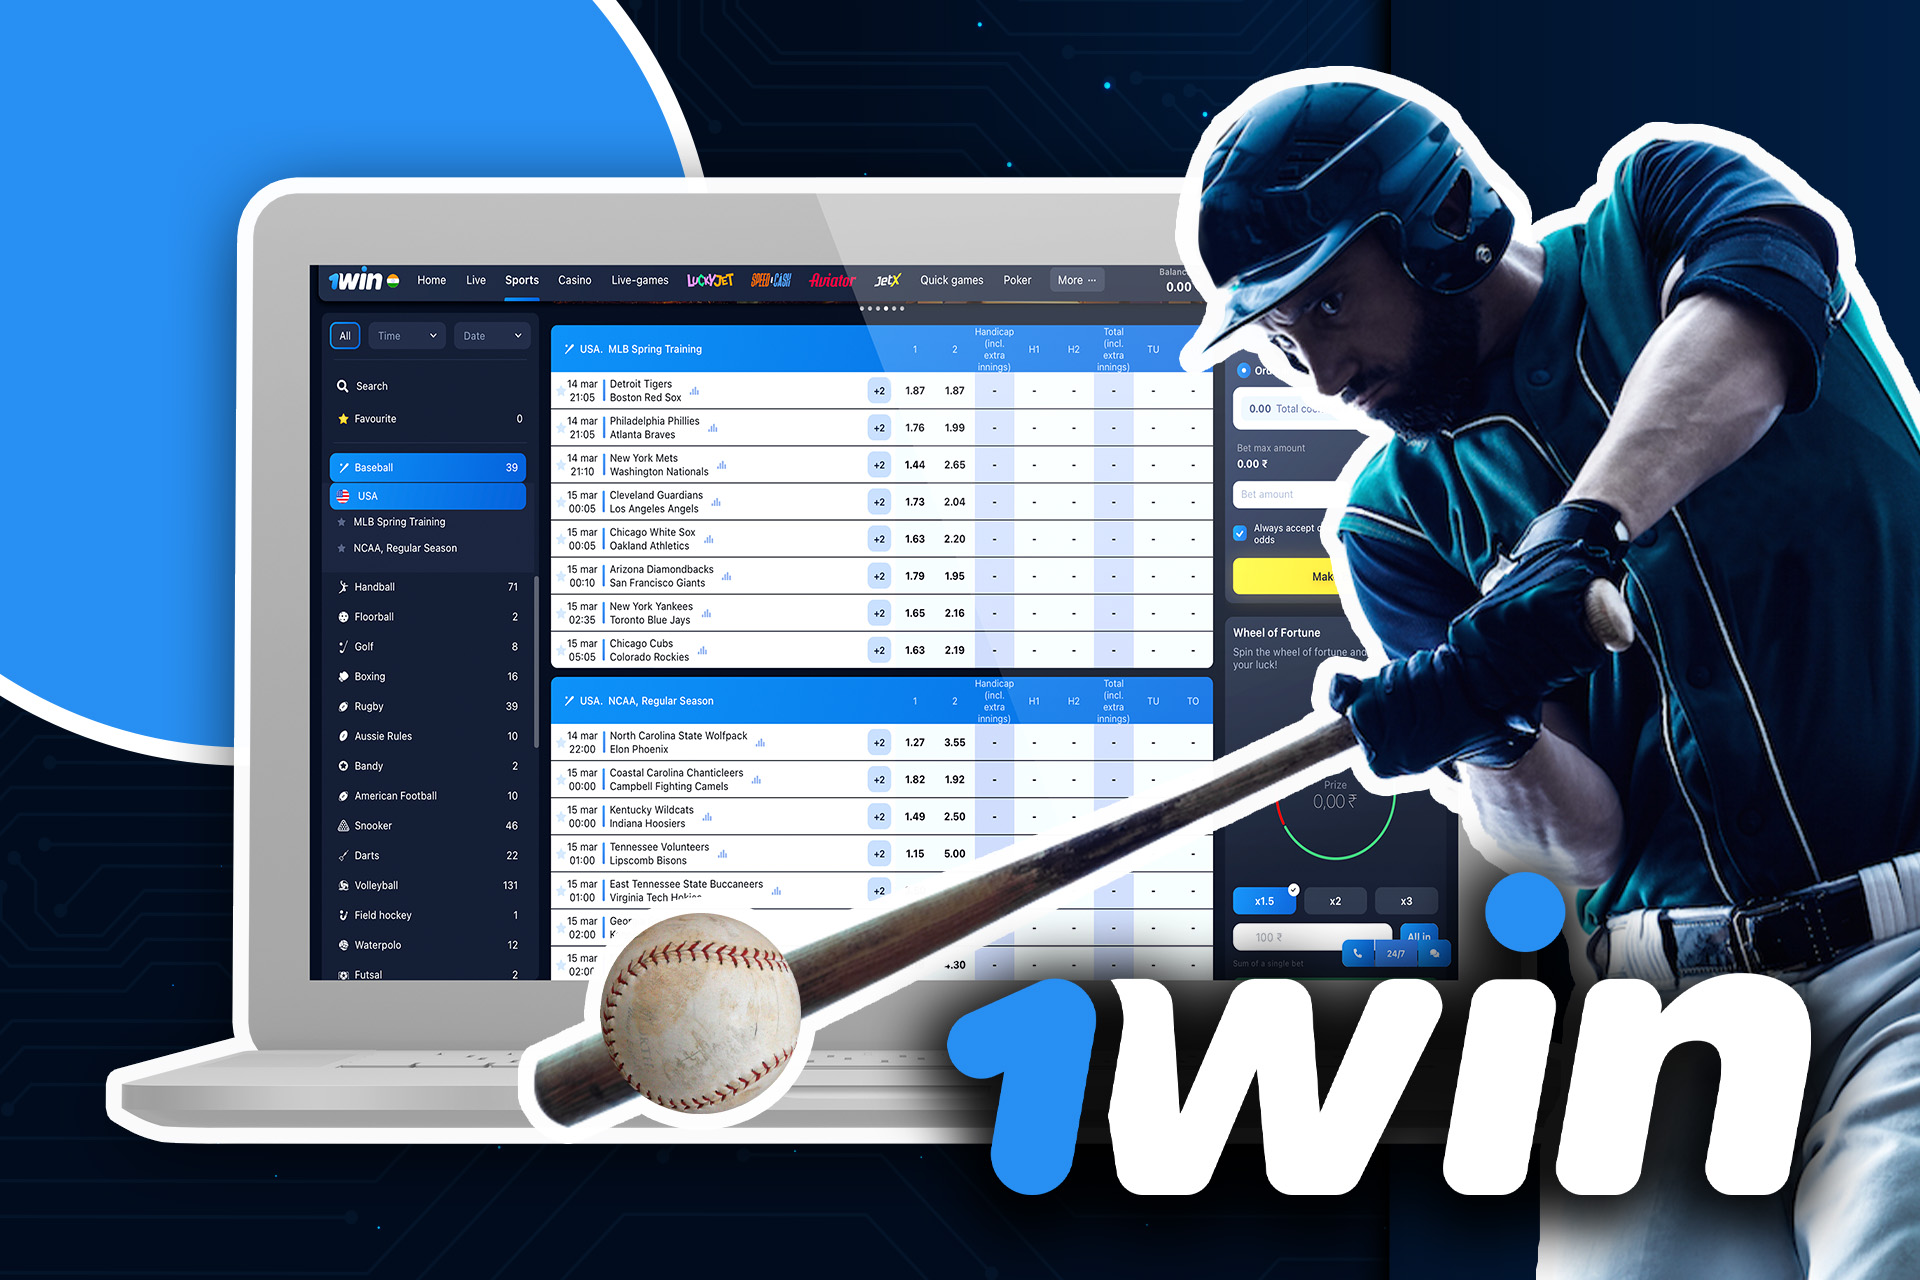 Baseball is also among the betting options on 1win.